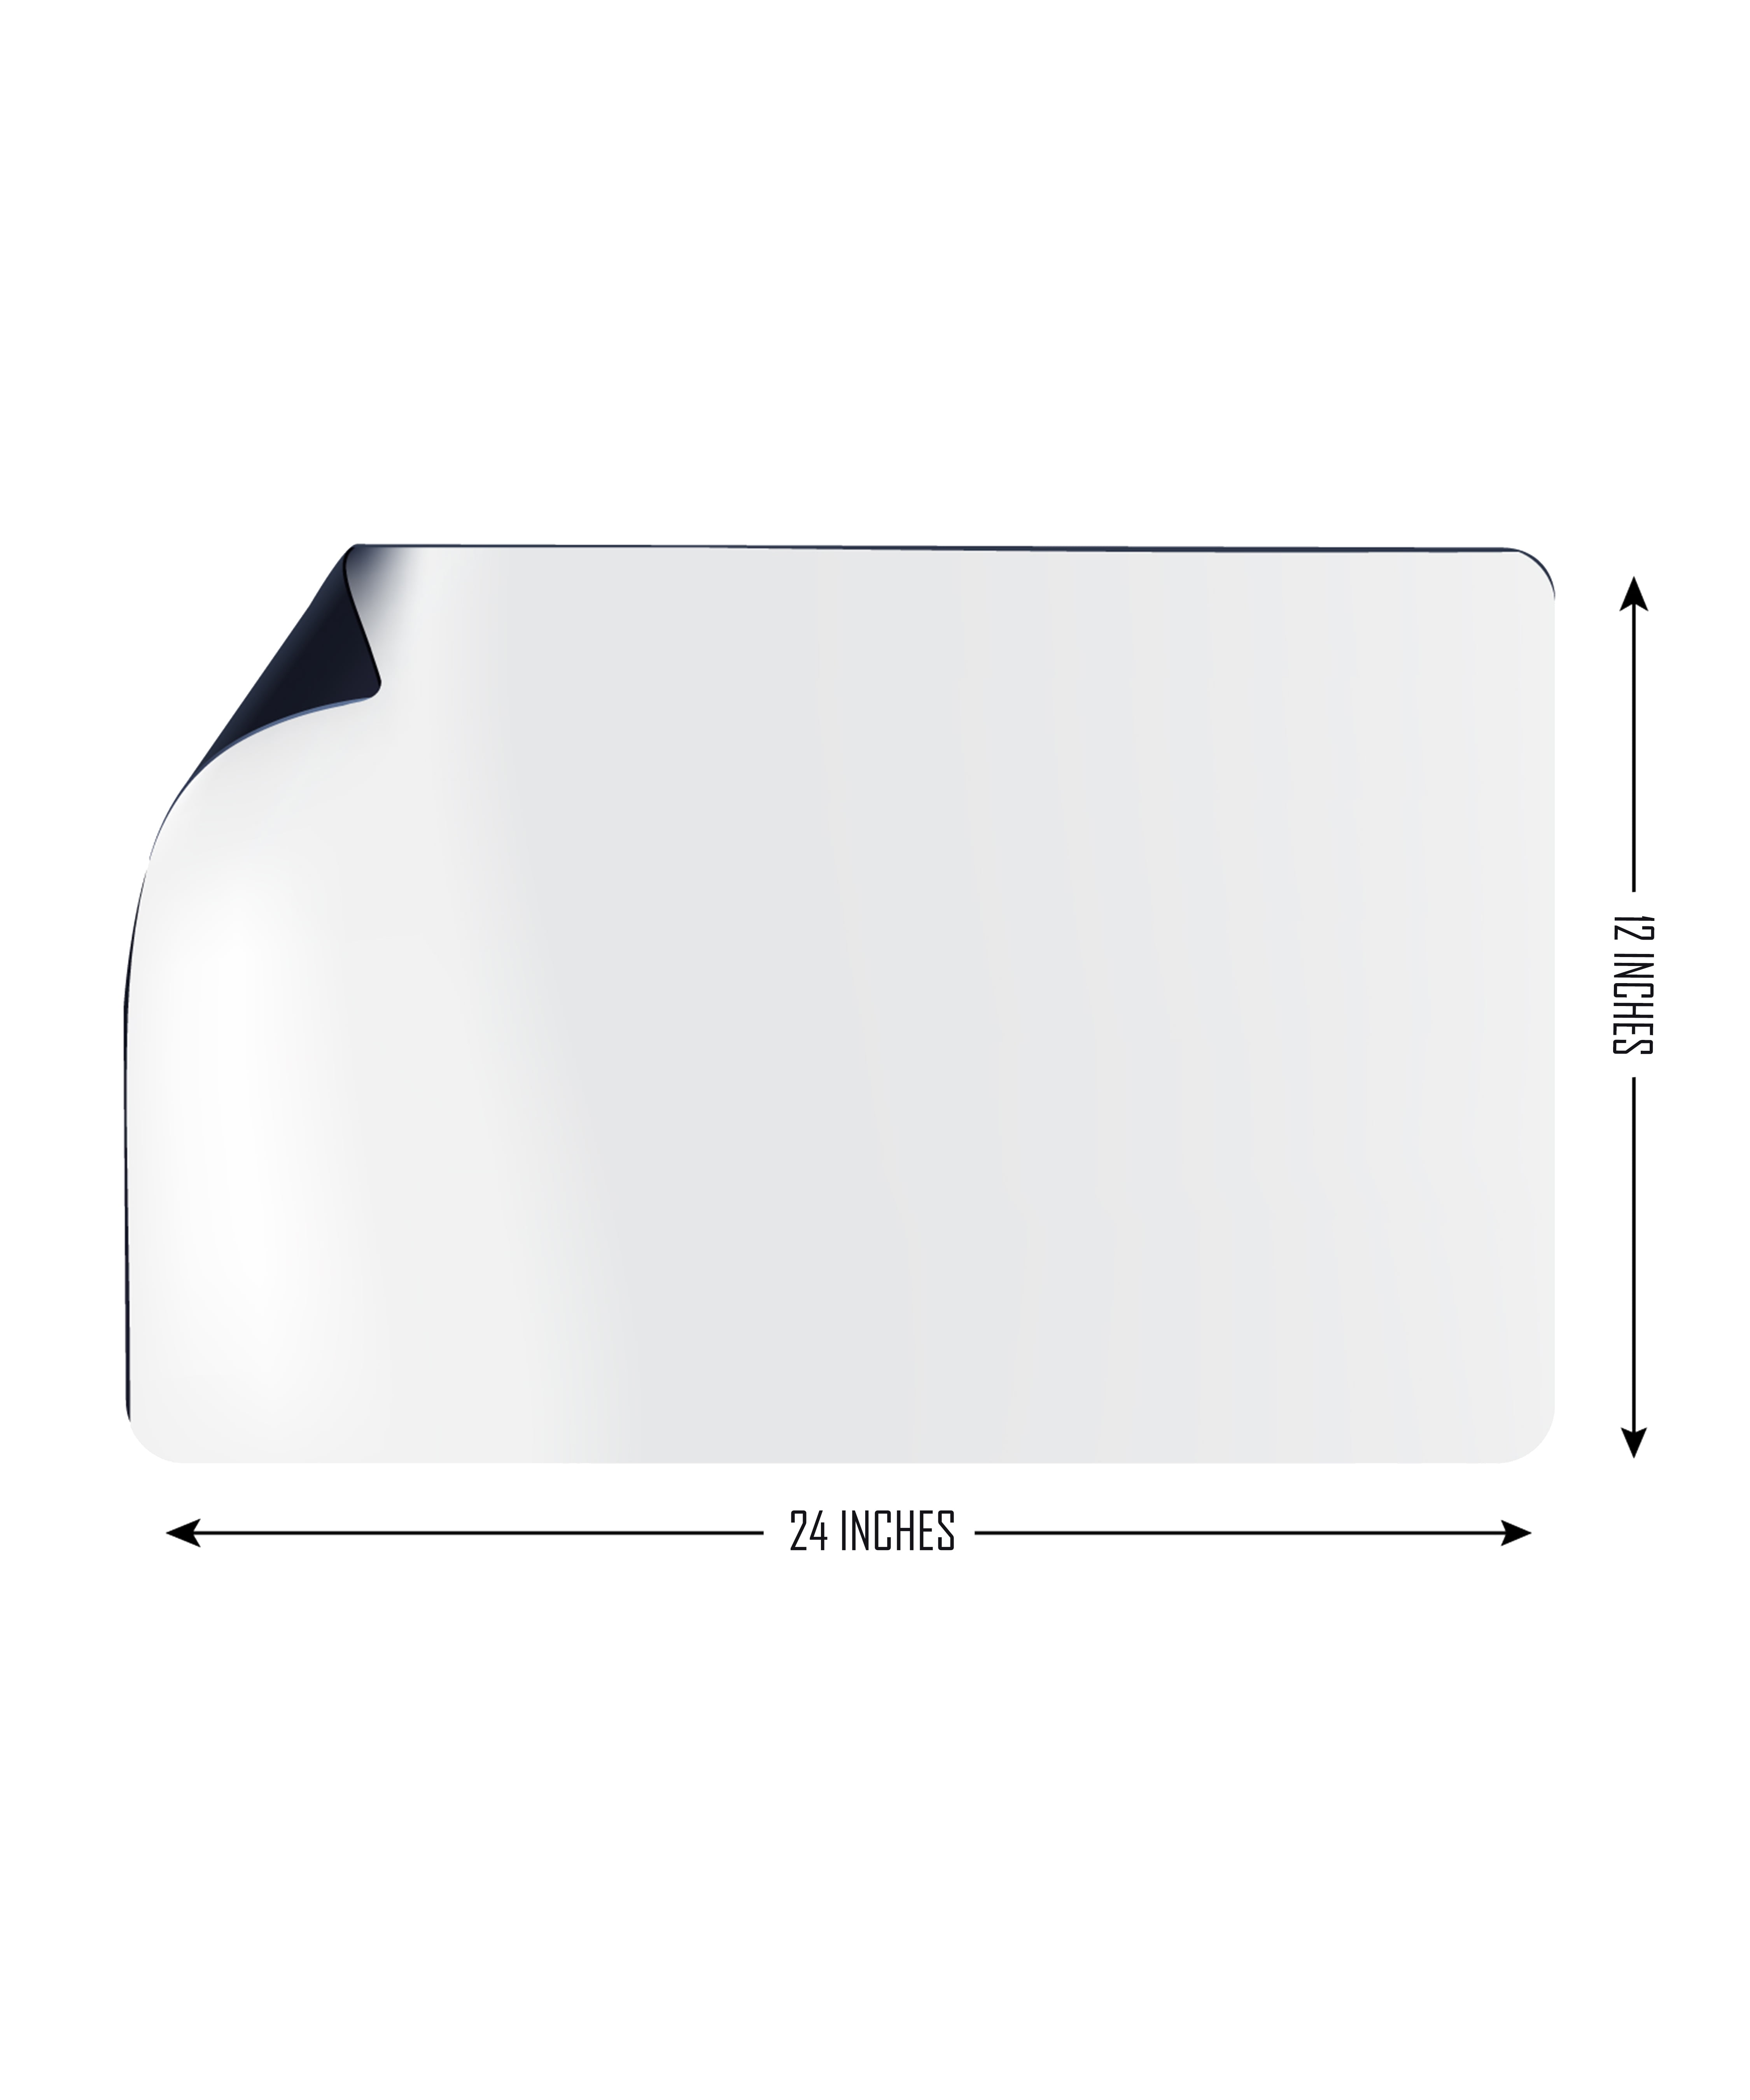 CAR MAGNET 1 12"x24" BLANK  HIGH QUALITY MAGNETIC SHEET 30 MIL. 